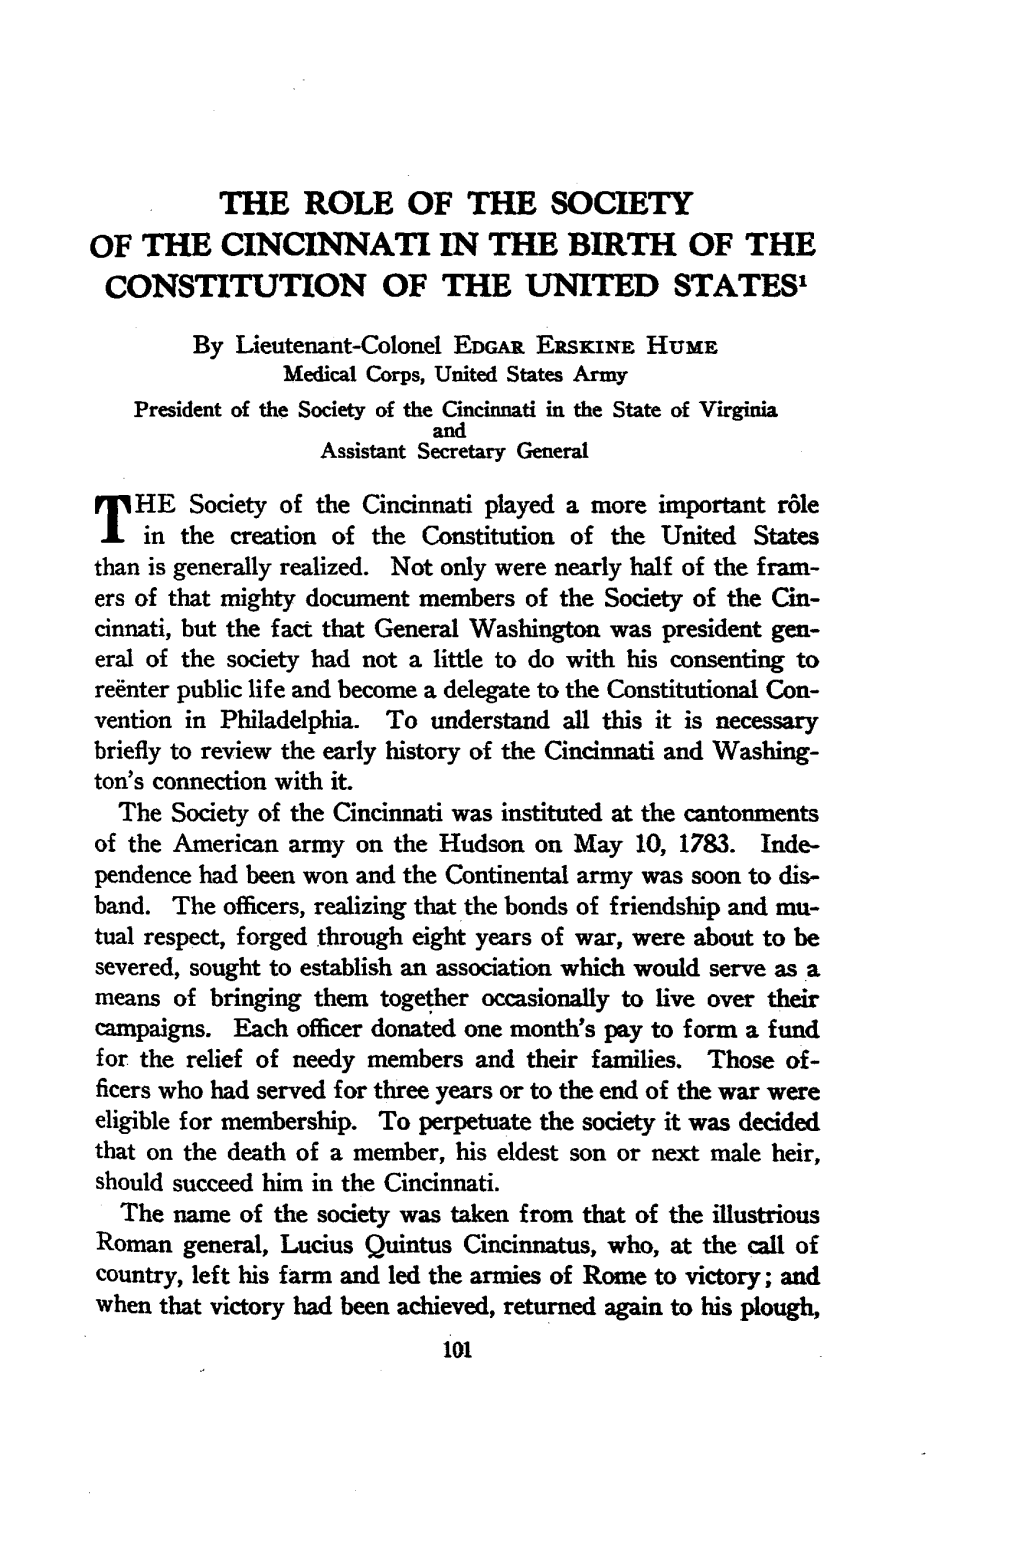 The Role of the Society of the Cincinnati in the Birth of the Constitution of the United States"